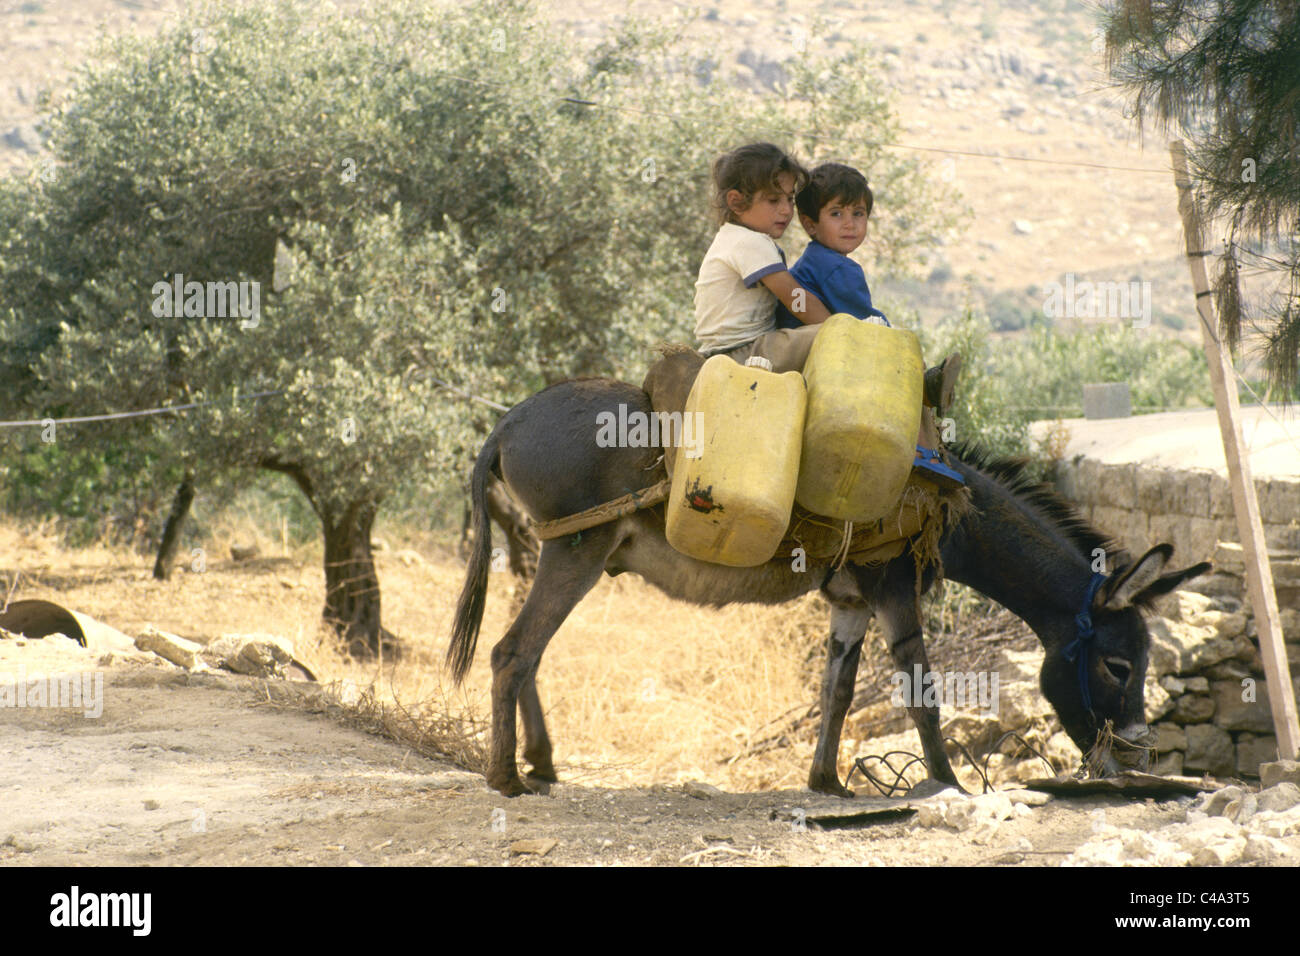 Photograph of two young boys riding on a donkey in an live plantation in Samaria Stock Photo